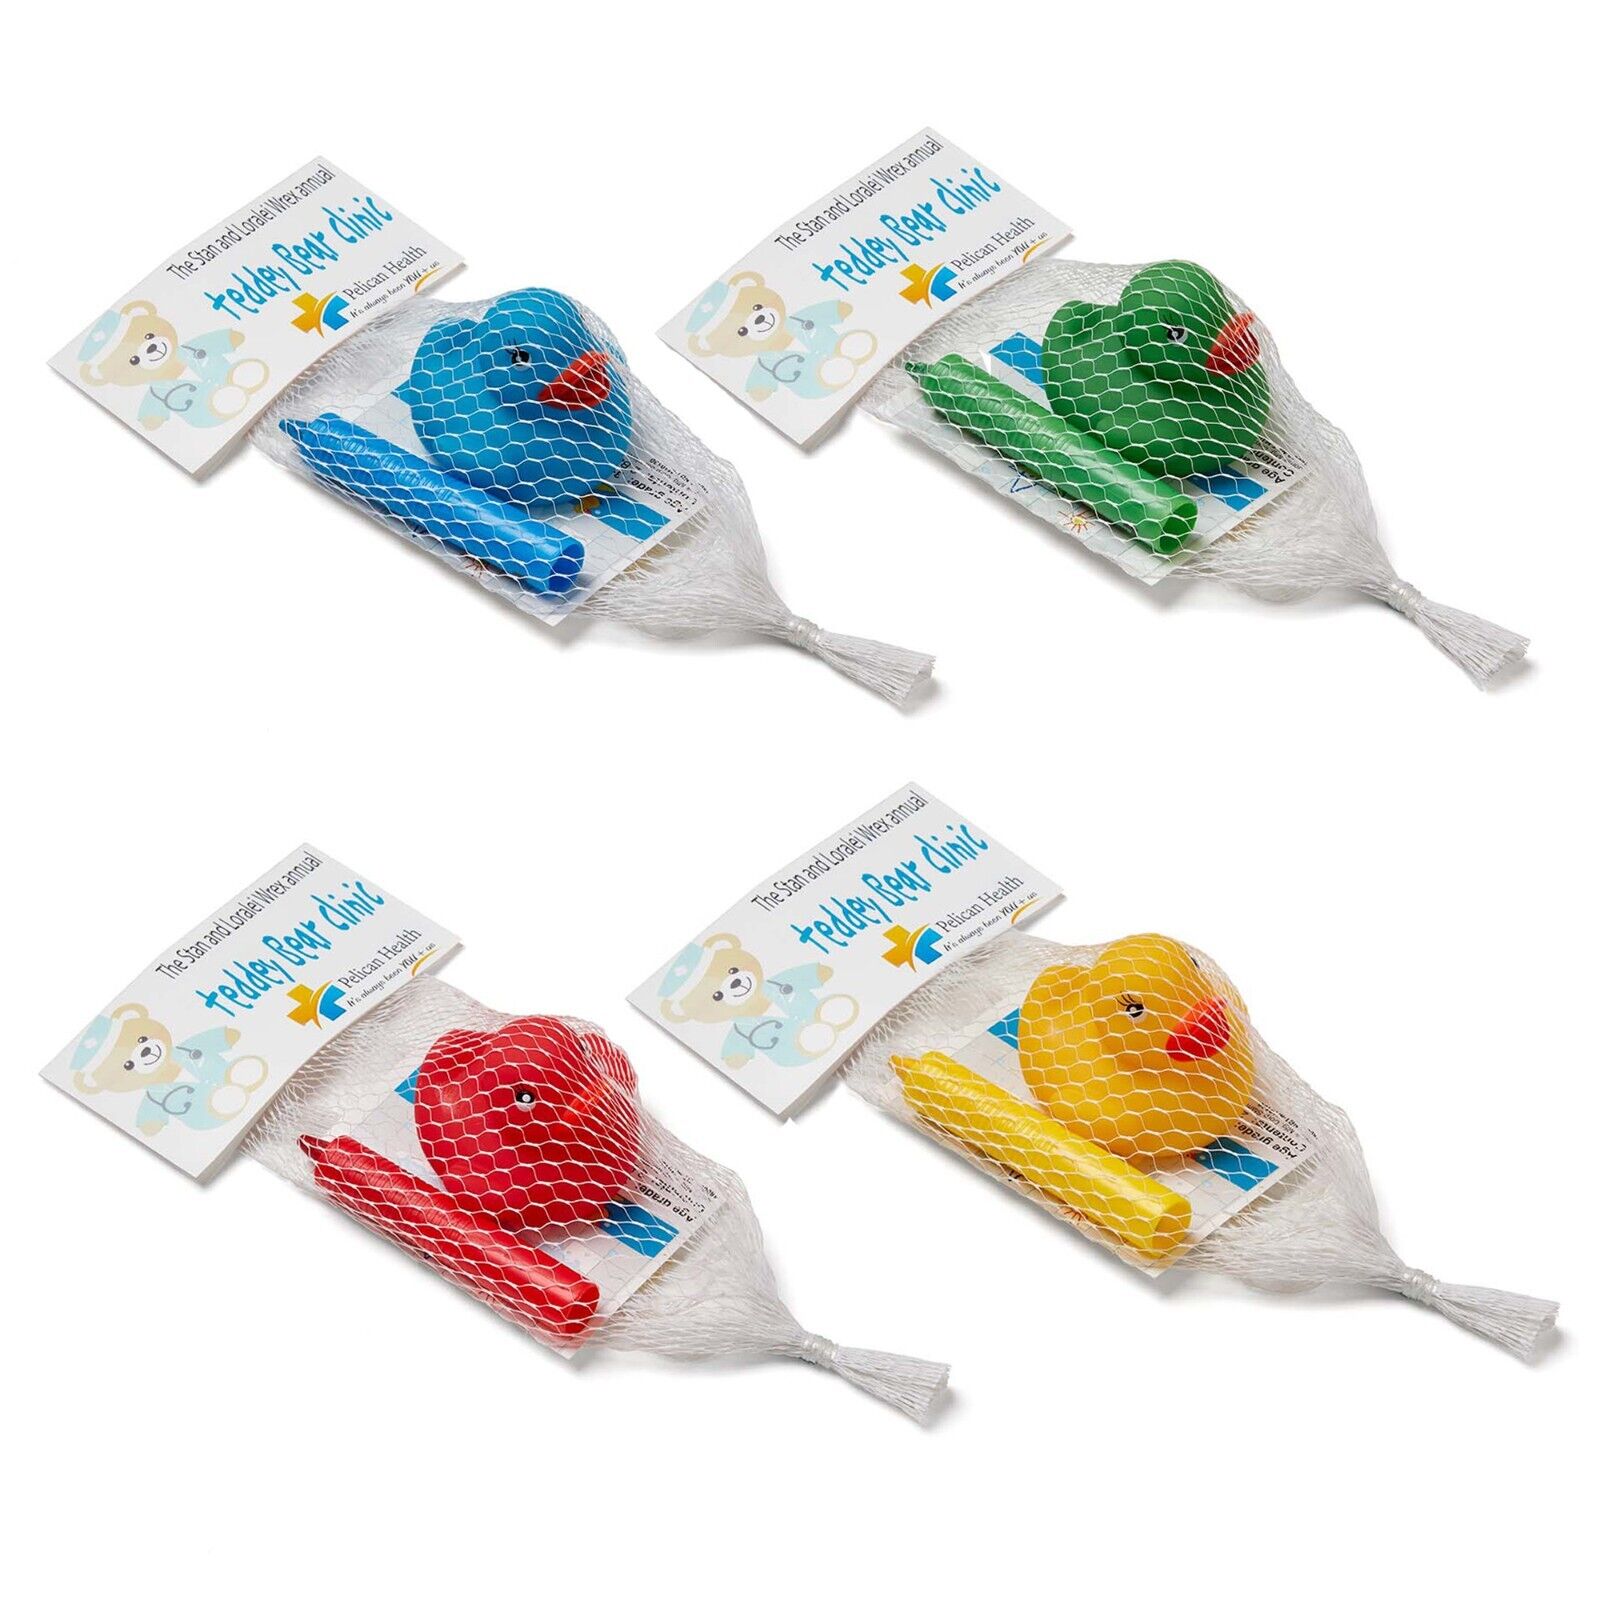 Promotional Bathtub Crayons with Rubber Duck Printed Hangtag with Your Imprint Unbranded JK-3825